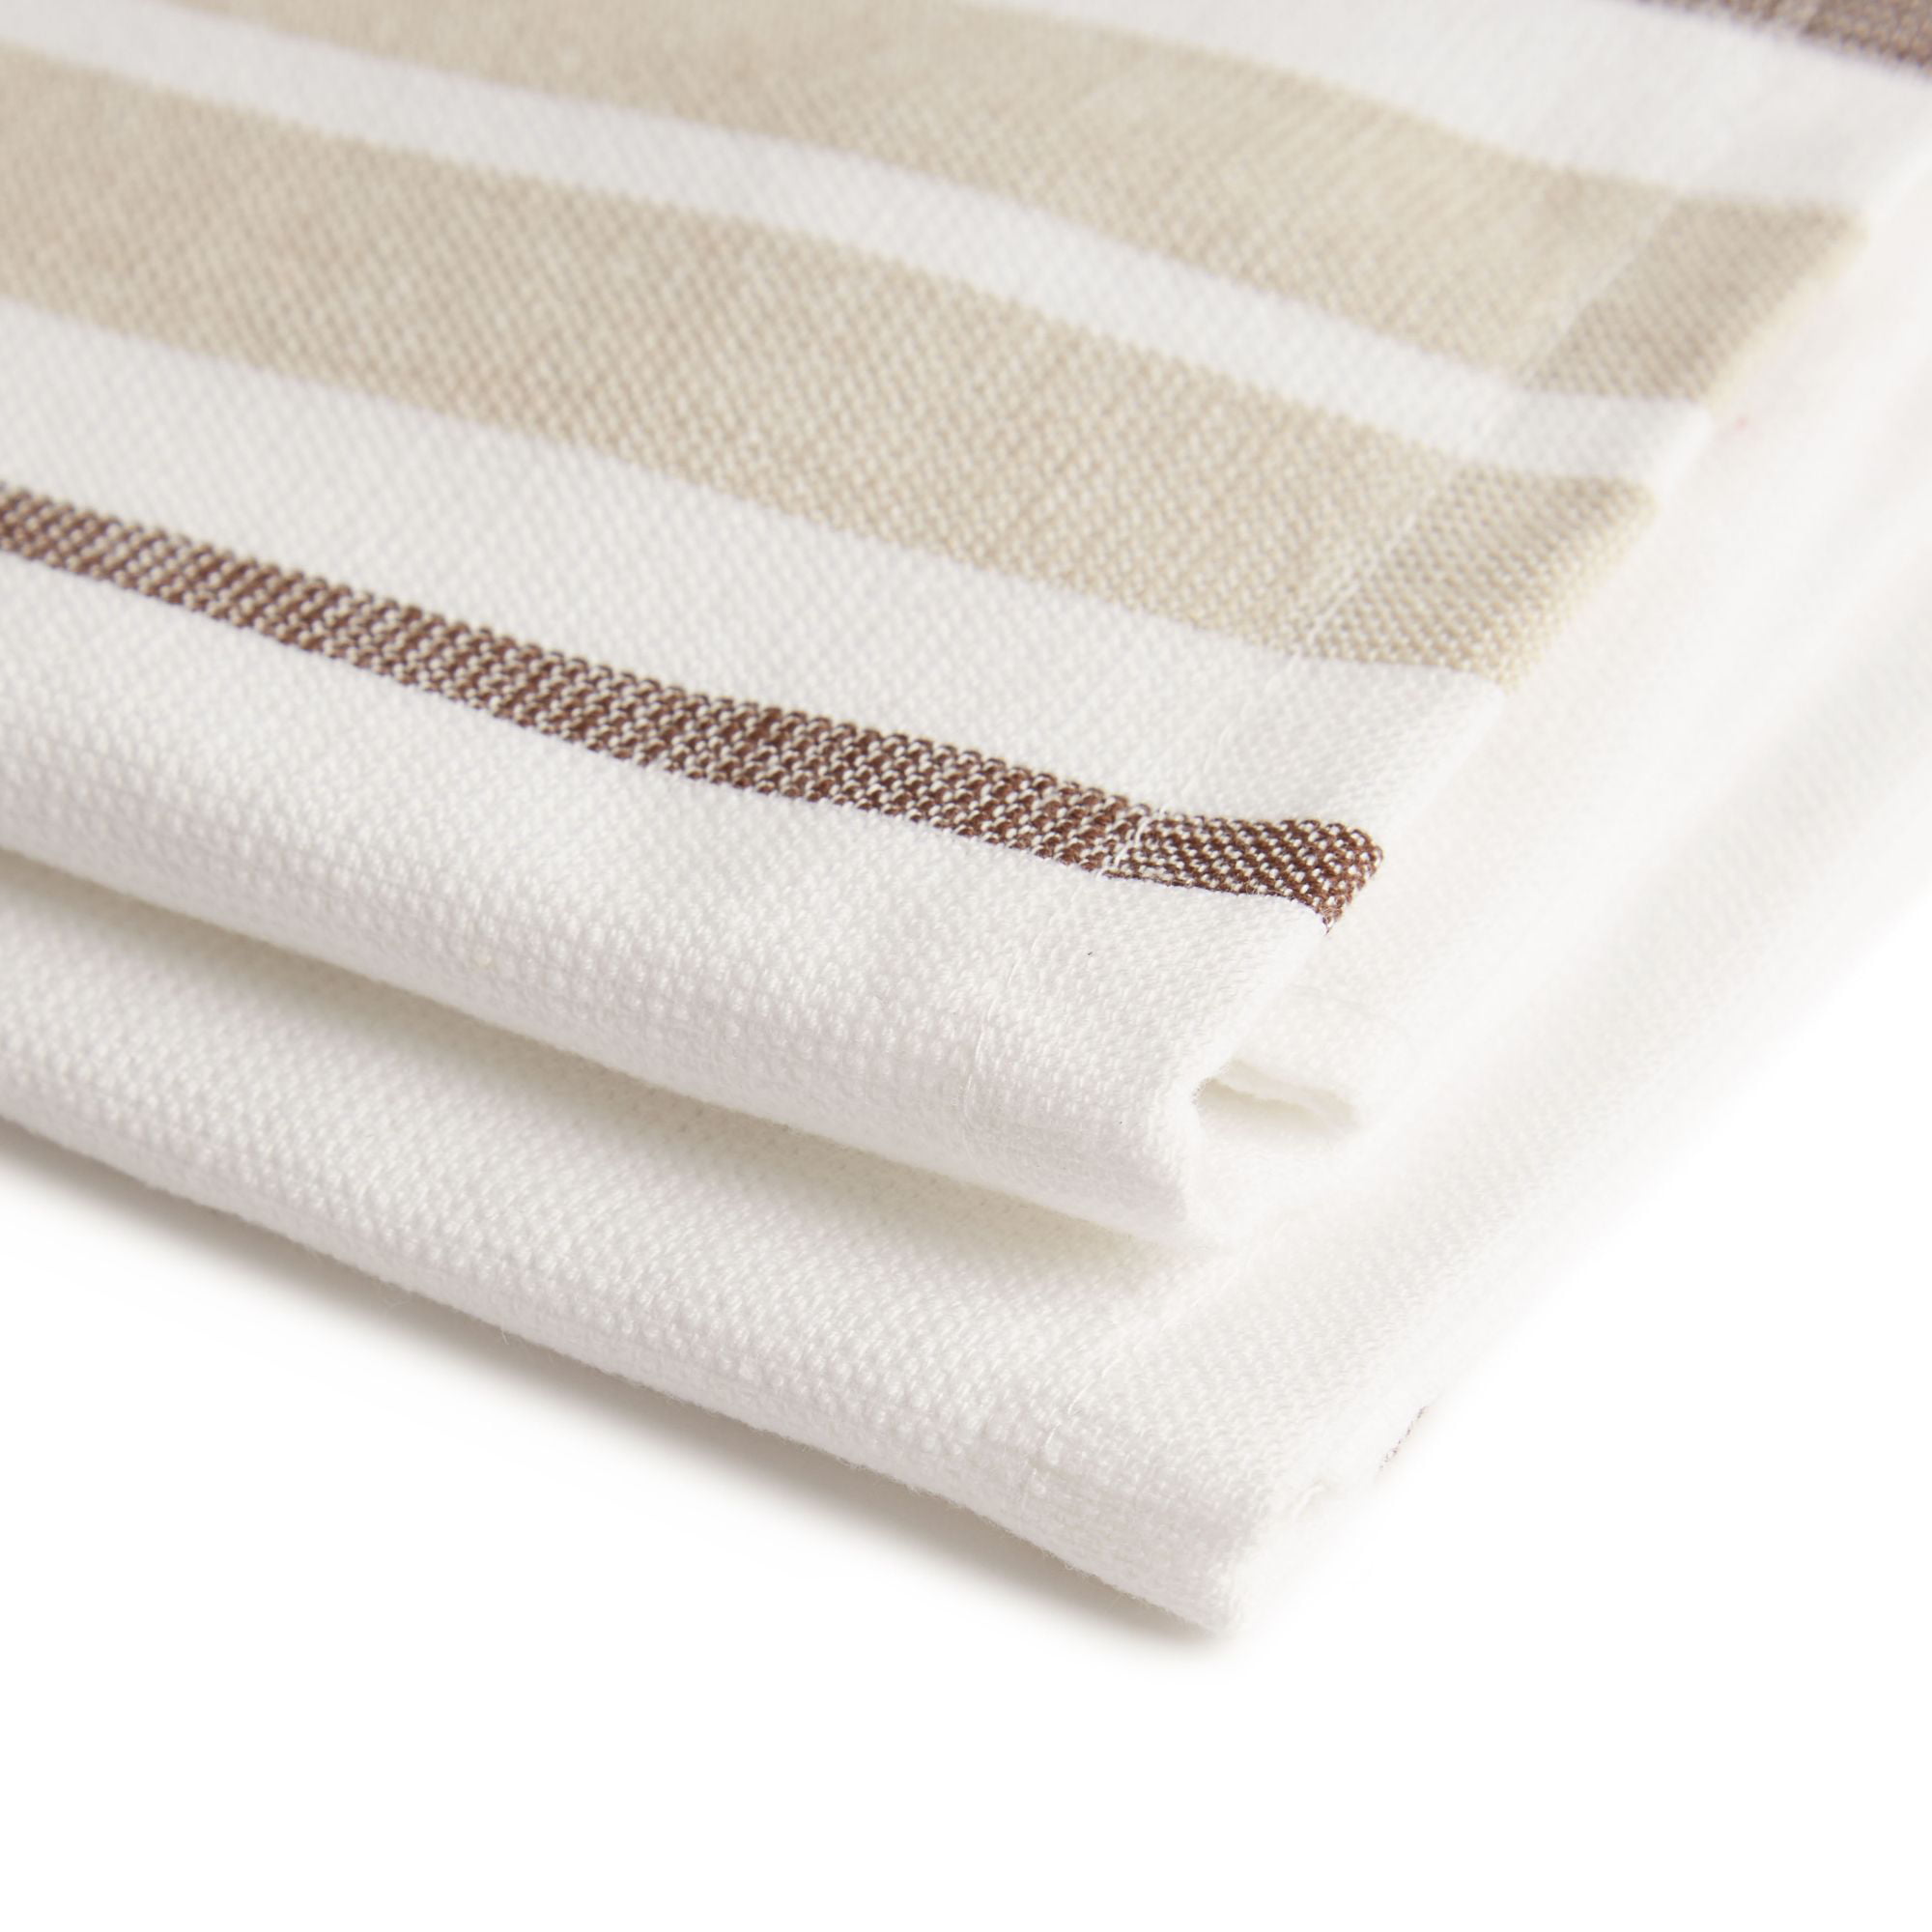 Bistro Town & Country Kitchen Towels 8 Pack (Tan and White)